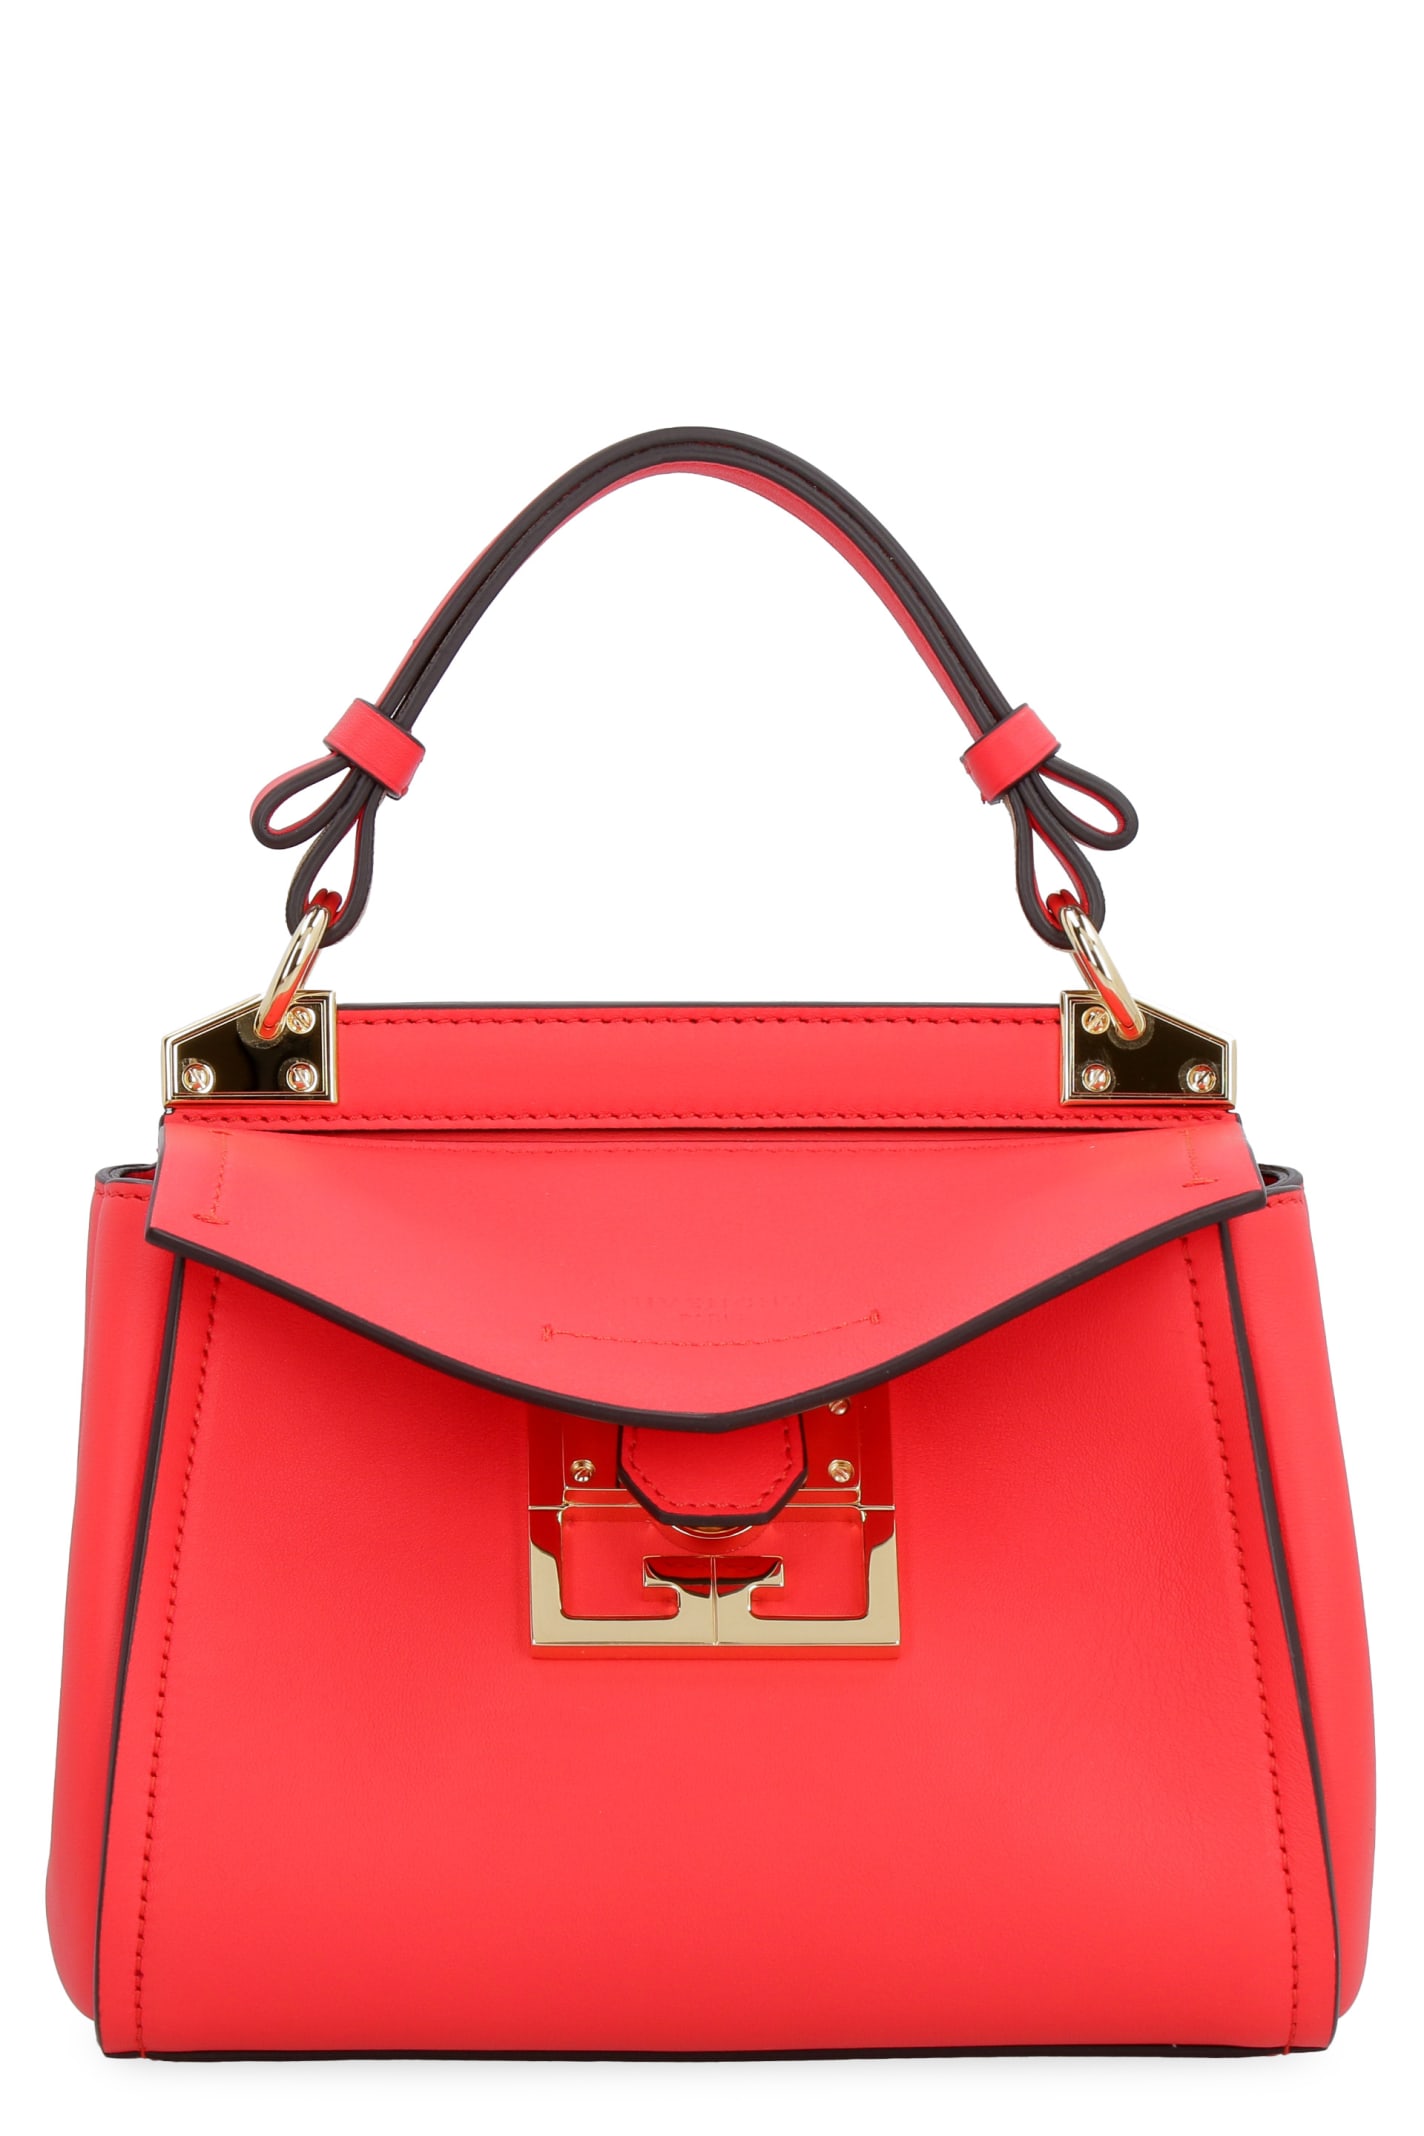 Givenchy Antigona Leather Flat Pouch In Red